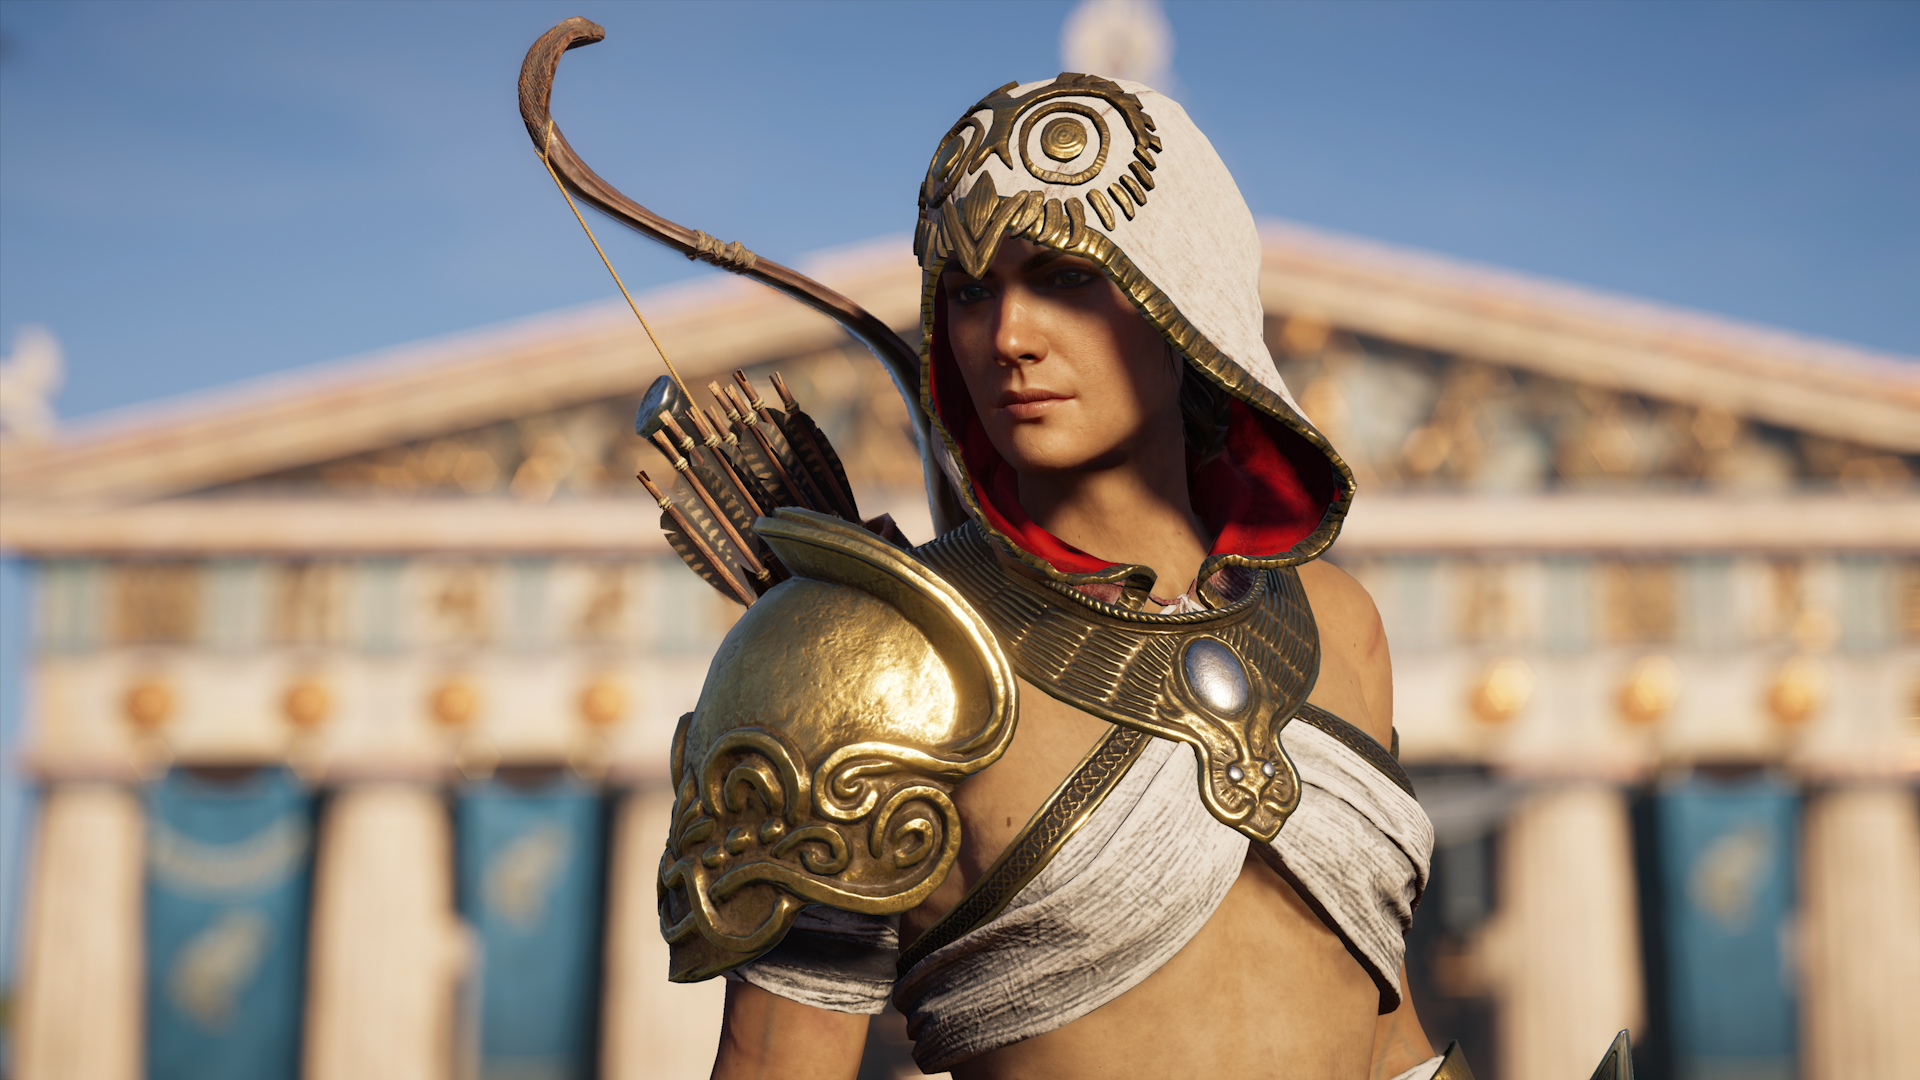 Assassin's Creed Infinity brings back multiplayer and new game Hexe